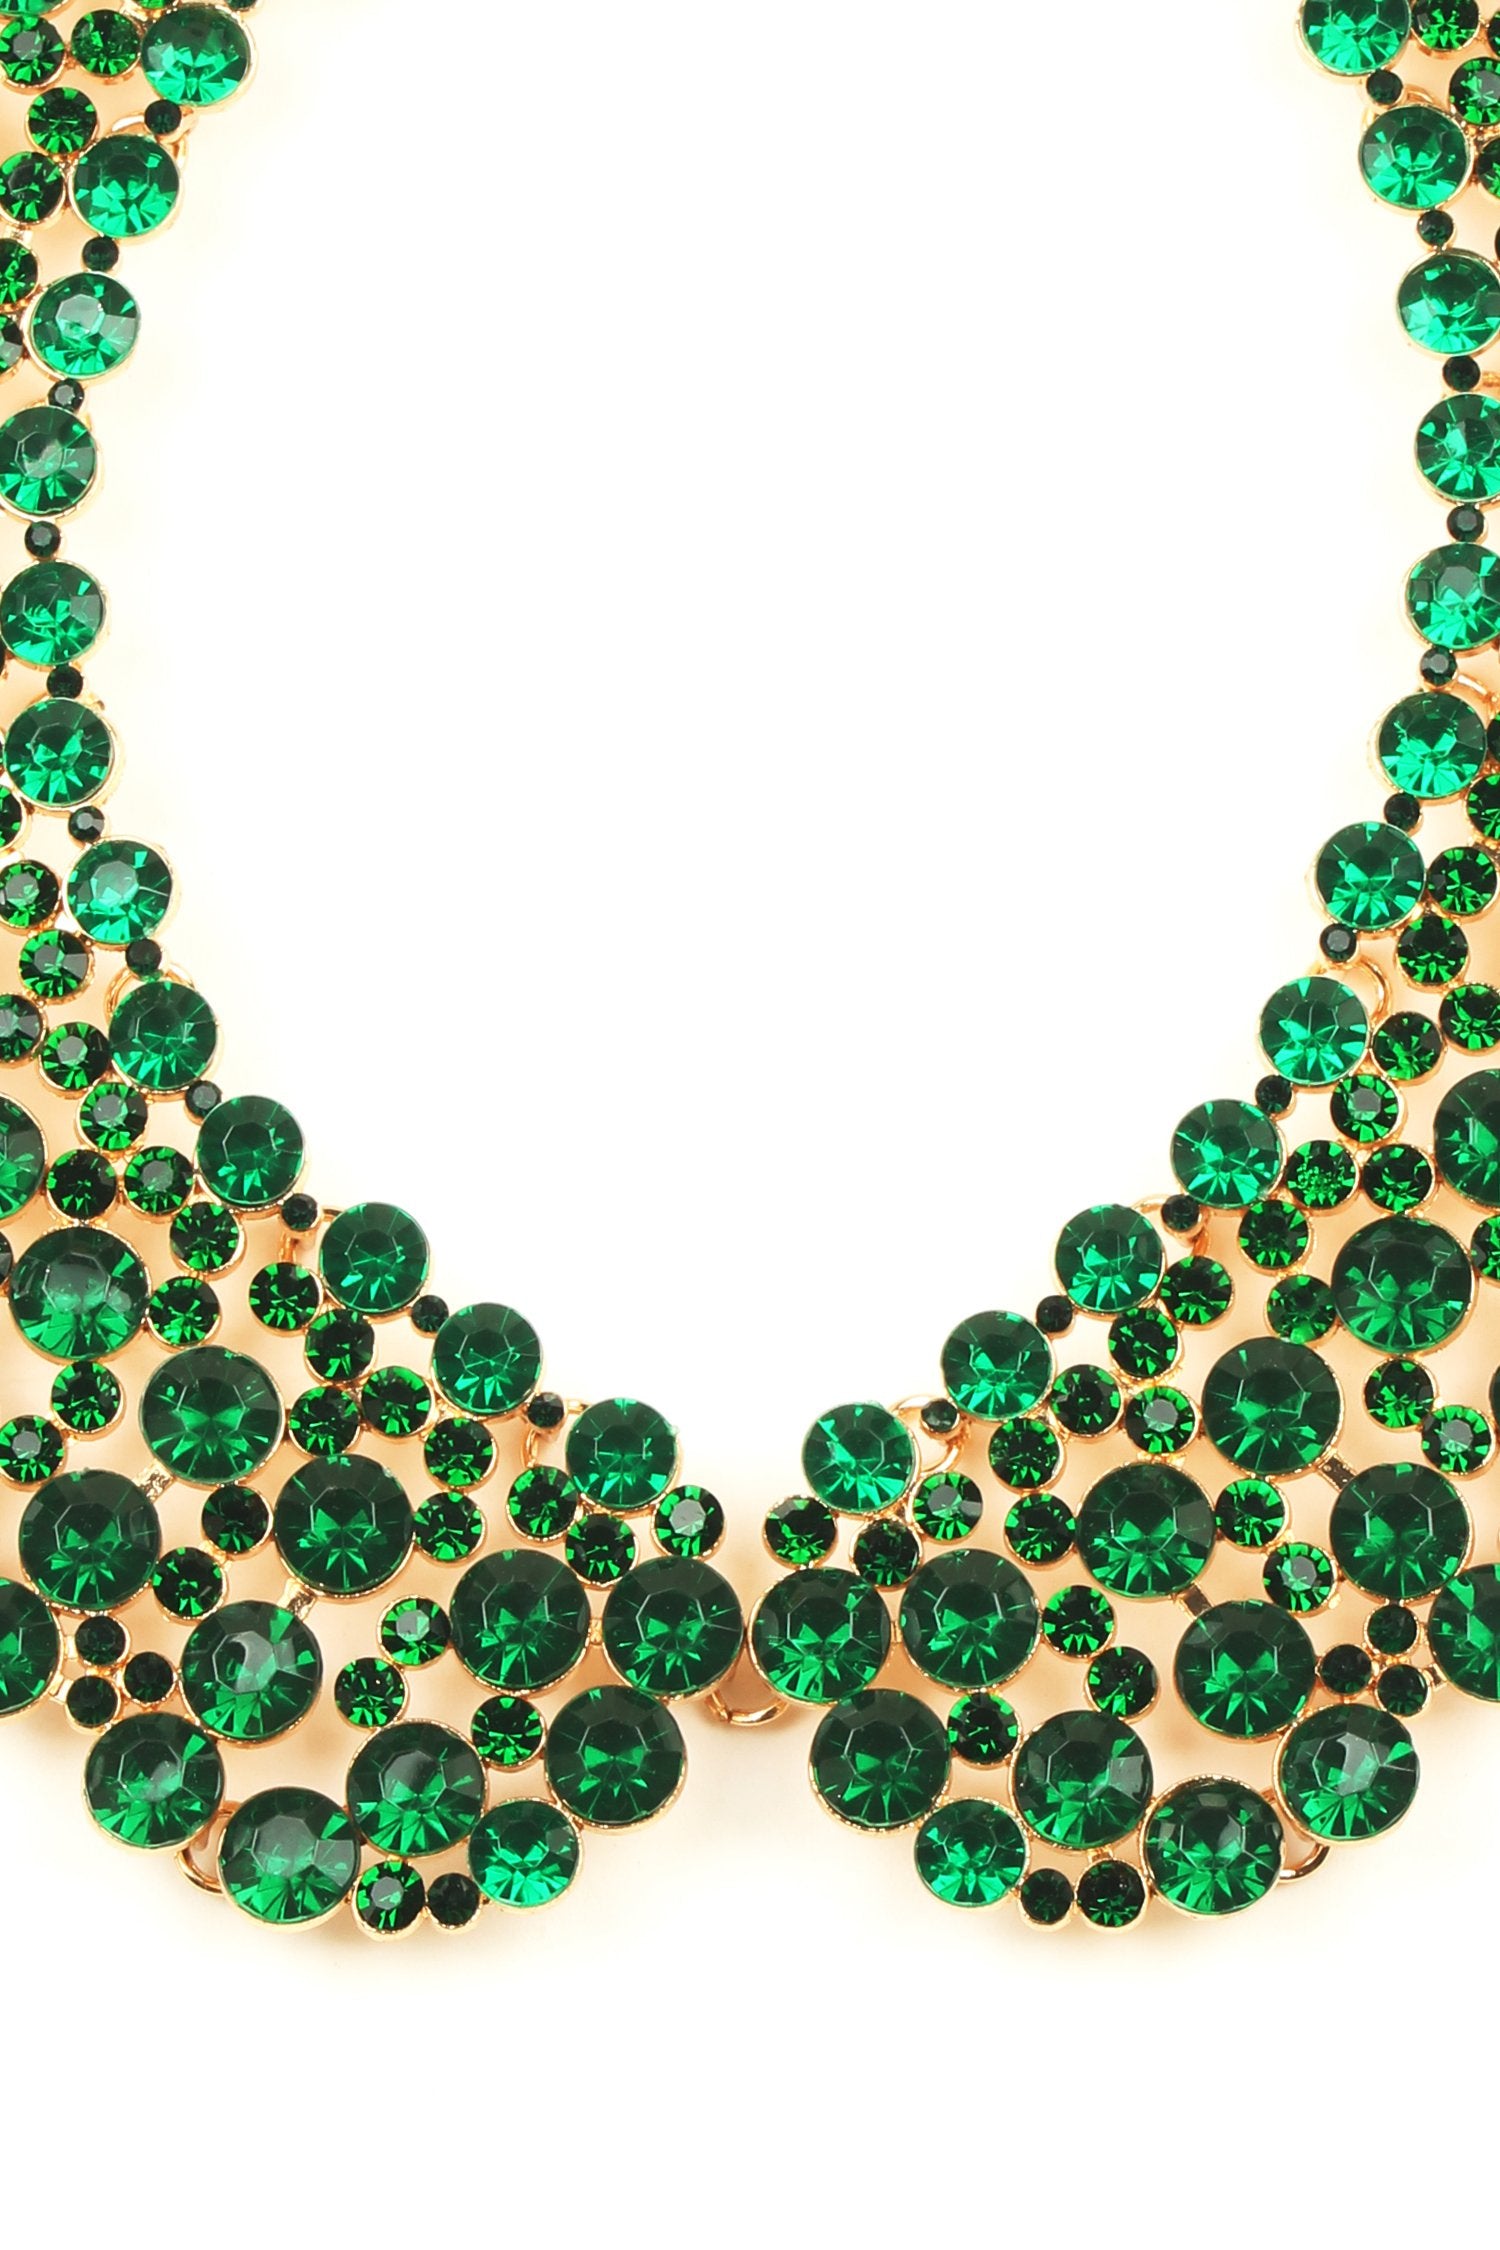 Gold and Green Crystal Statement Necklace - Diana Collar Necklace